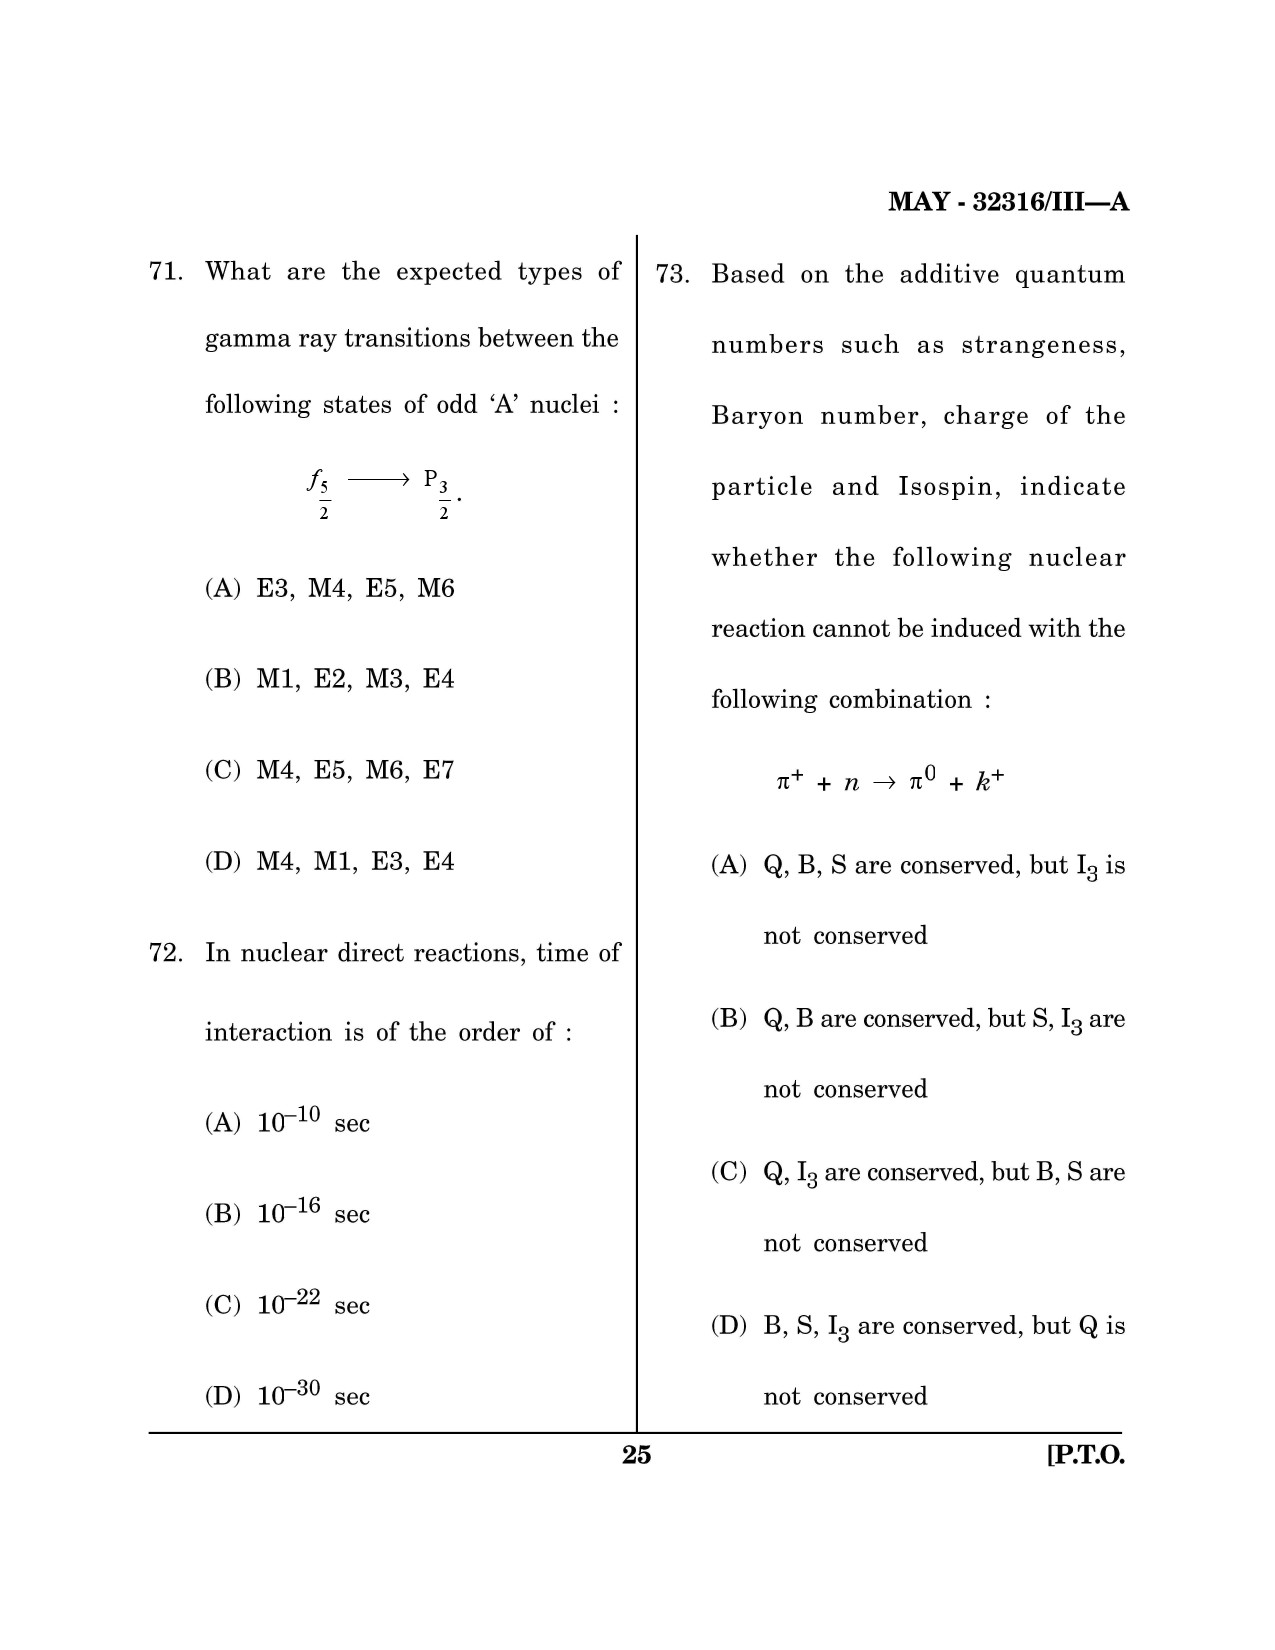 Maharashtra SET Physical Science Question Paper III May 2016 24